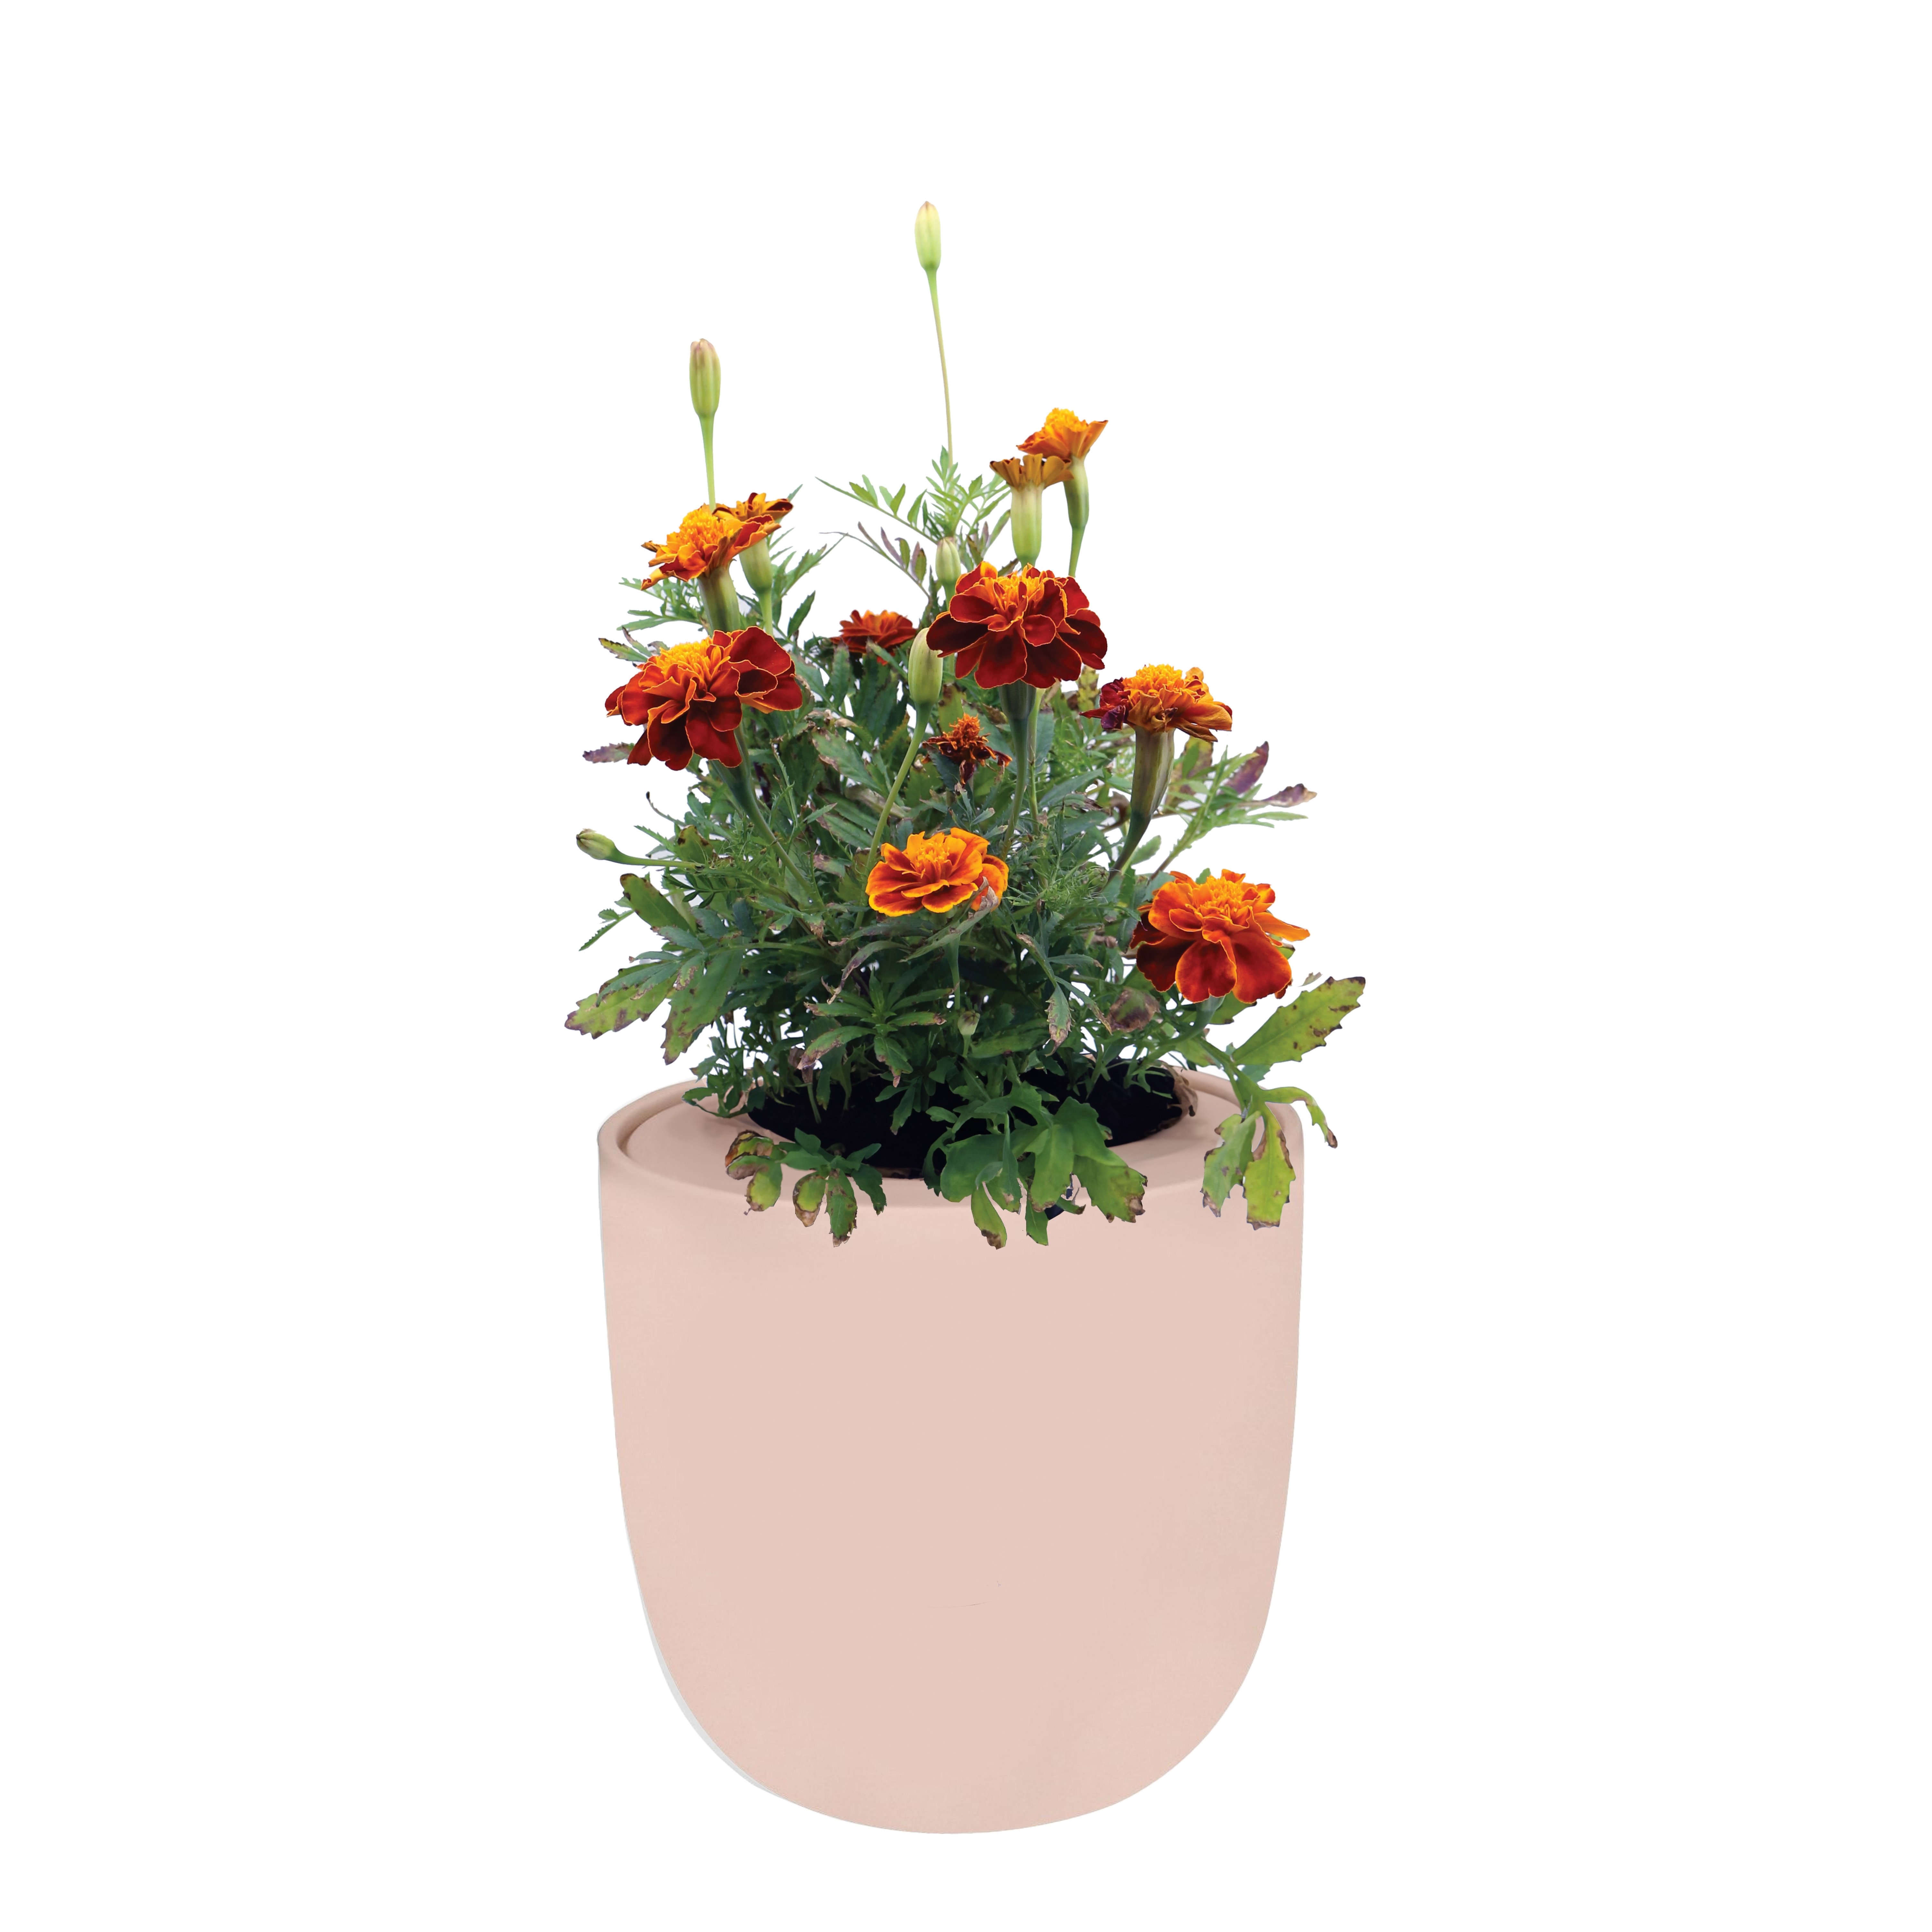 Hydroponic Growing Kit with Pink Ceramic Pot and Seeds - Marigold (French Double Dwarf)